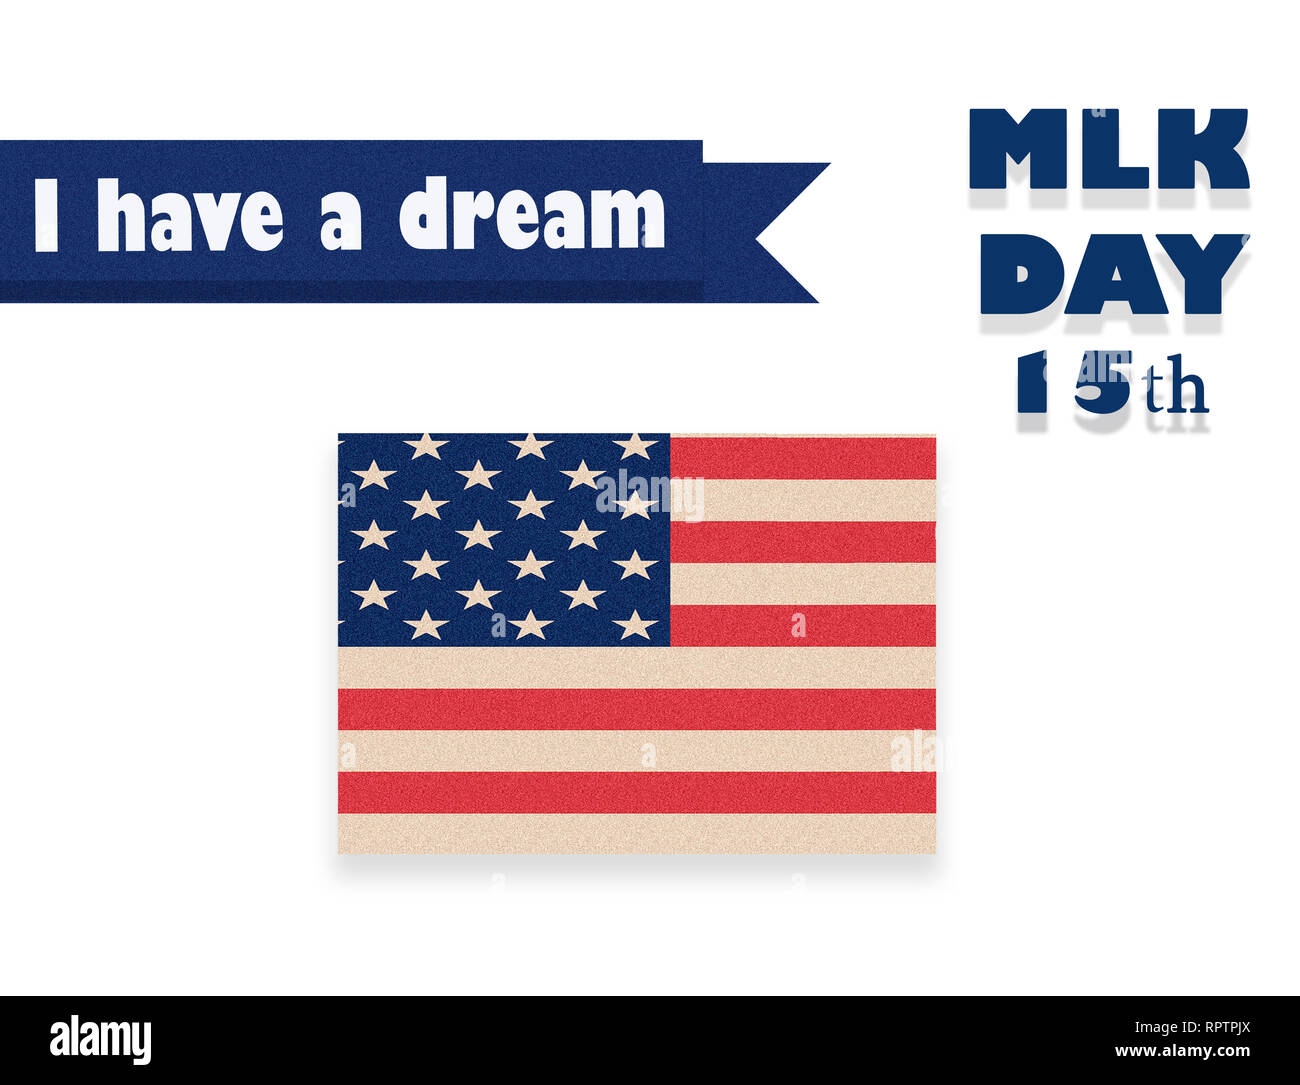 Martin Luther King Day illustration, I have a dream quote with USA flag waving. Stock Photo